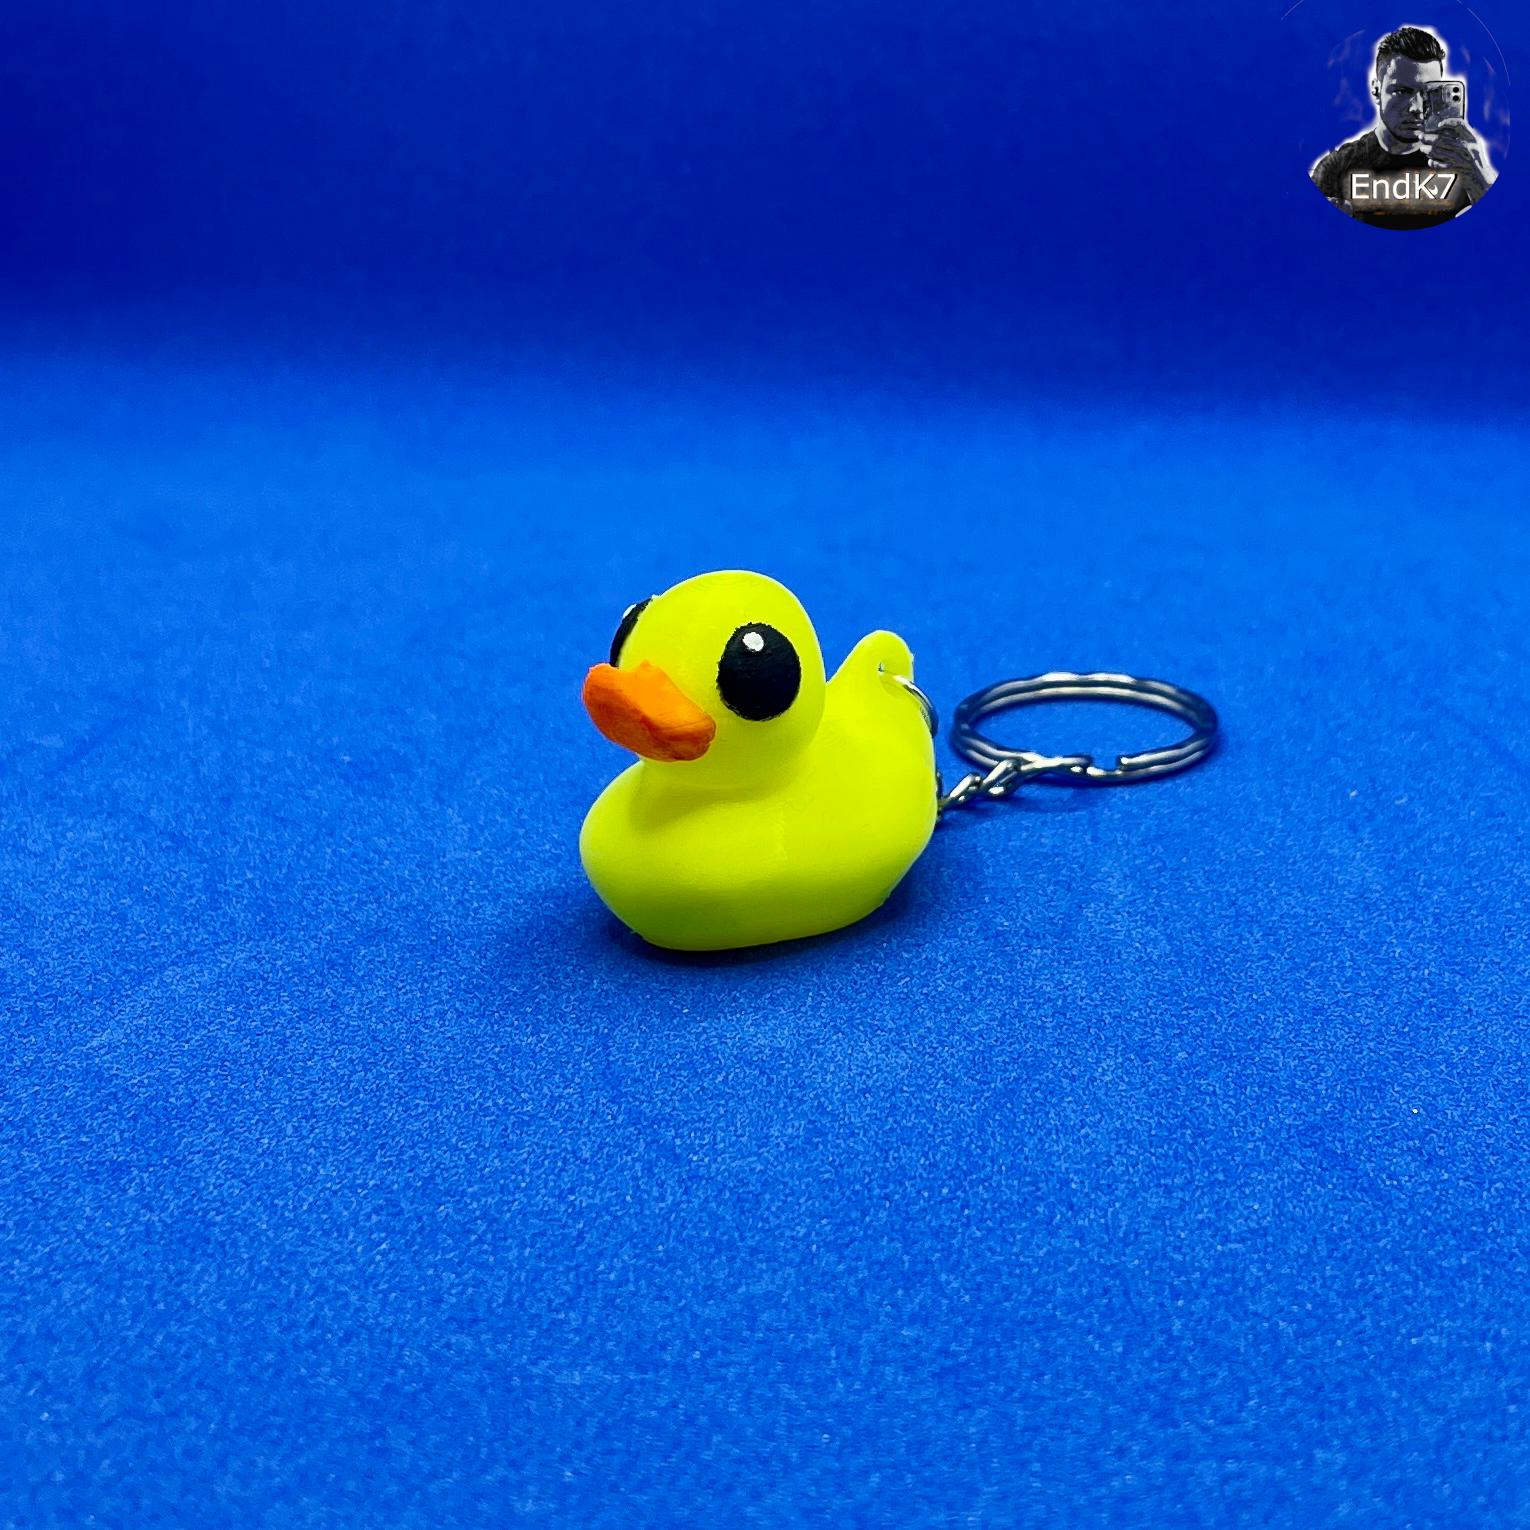 Rubber Duck Keychain - Easy & Fast Print - No Supports 3d model